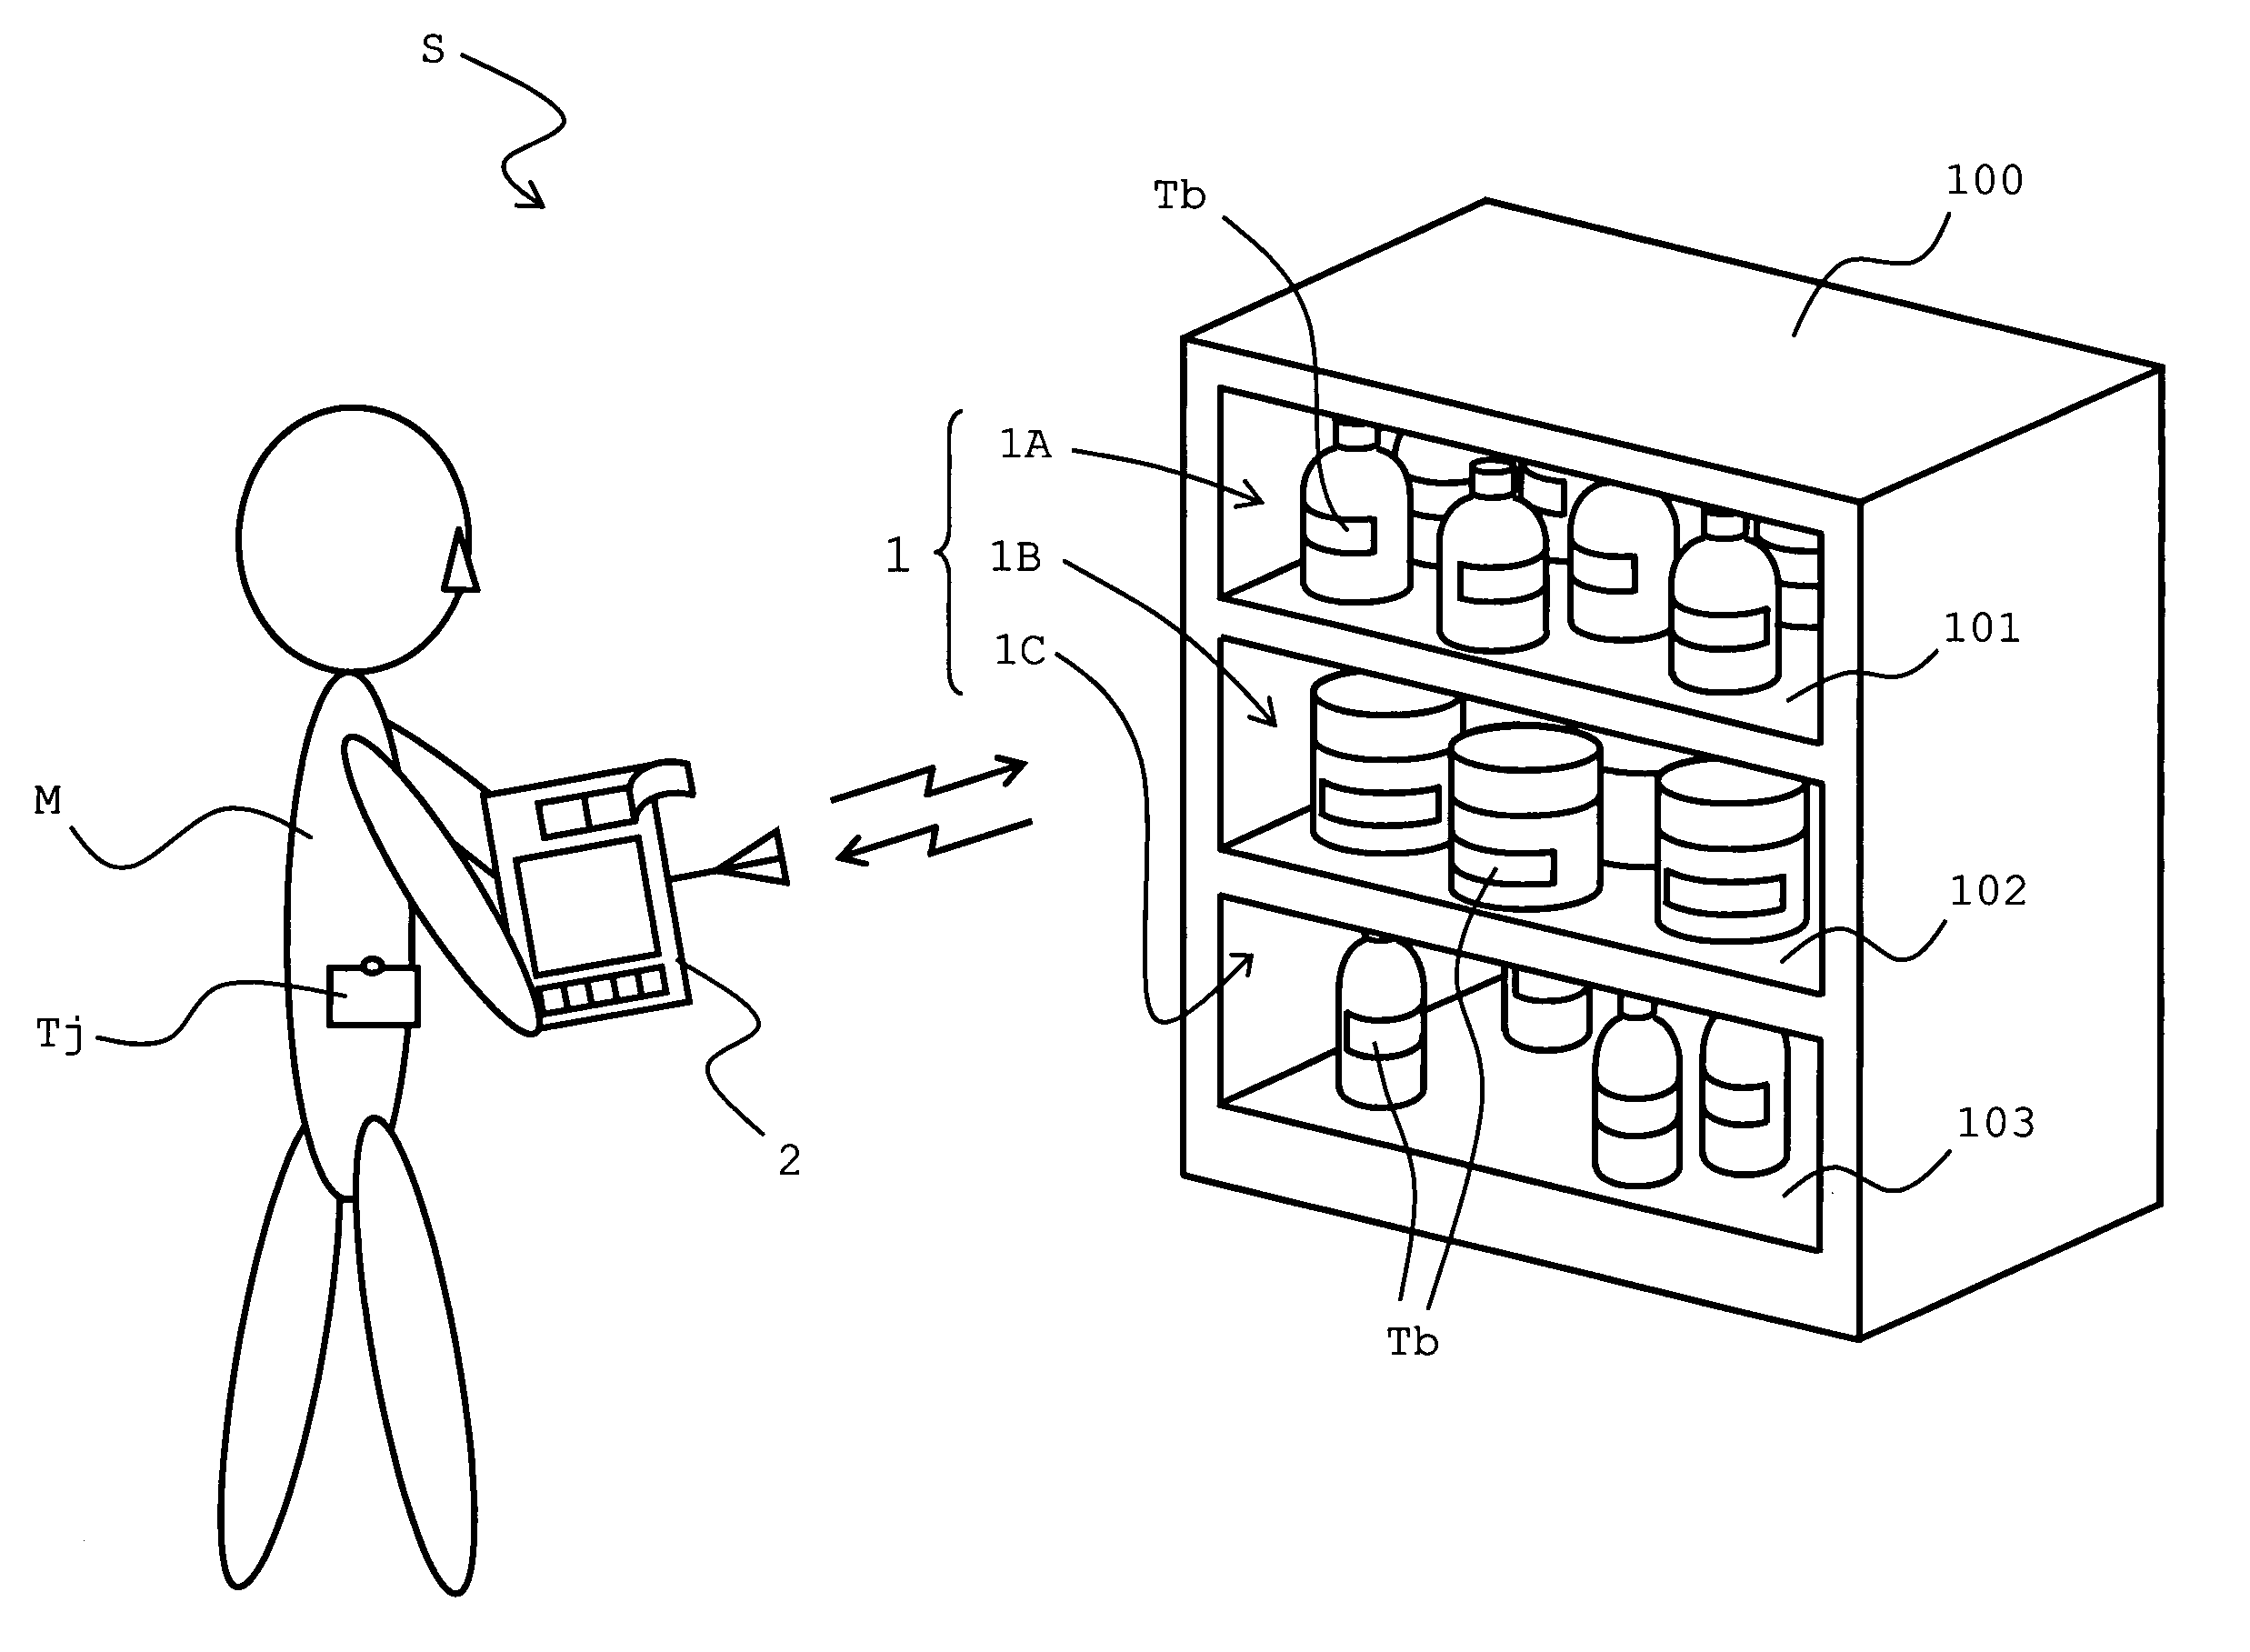 Article management system, RFID tag, and apparatus for communicating with RFID tag